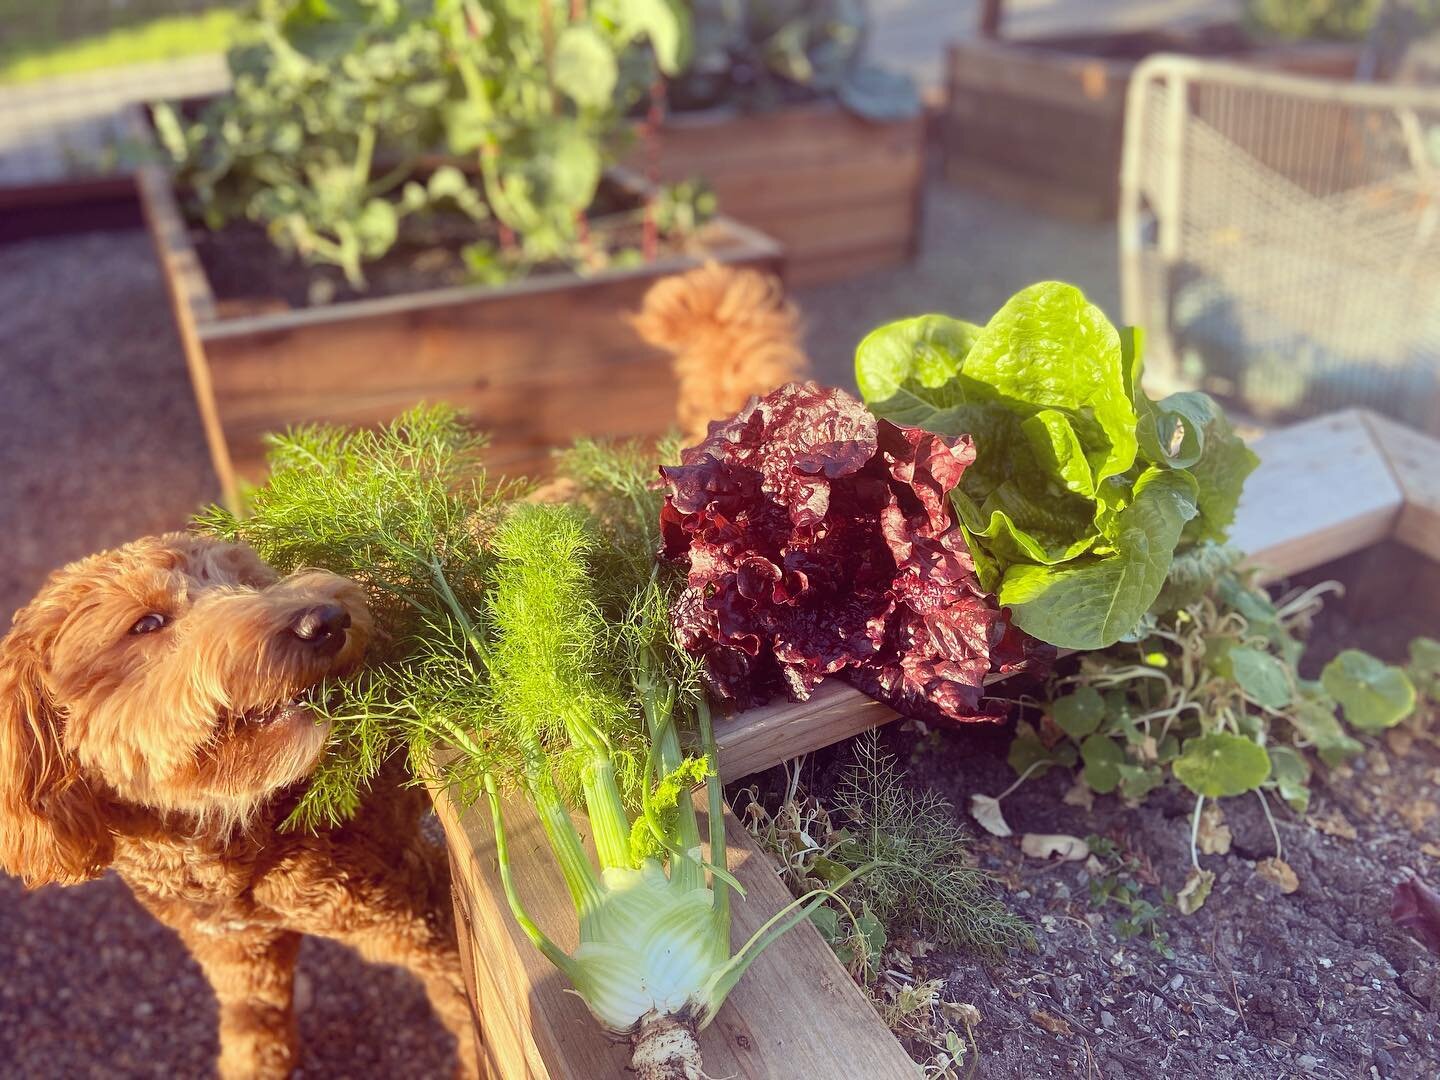 Wednesday&rsquo;s vegetable garden harvest!  Do dogs like fennel? We have many projects in the works and will be sharing updates, but in the meantime photos from our redesigned &amp; replanted garden #veggiegarden #permaculture #perennials #gardendes